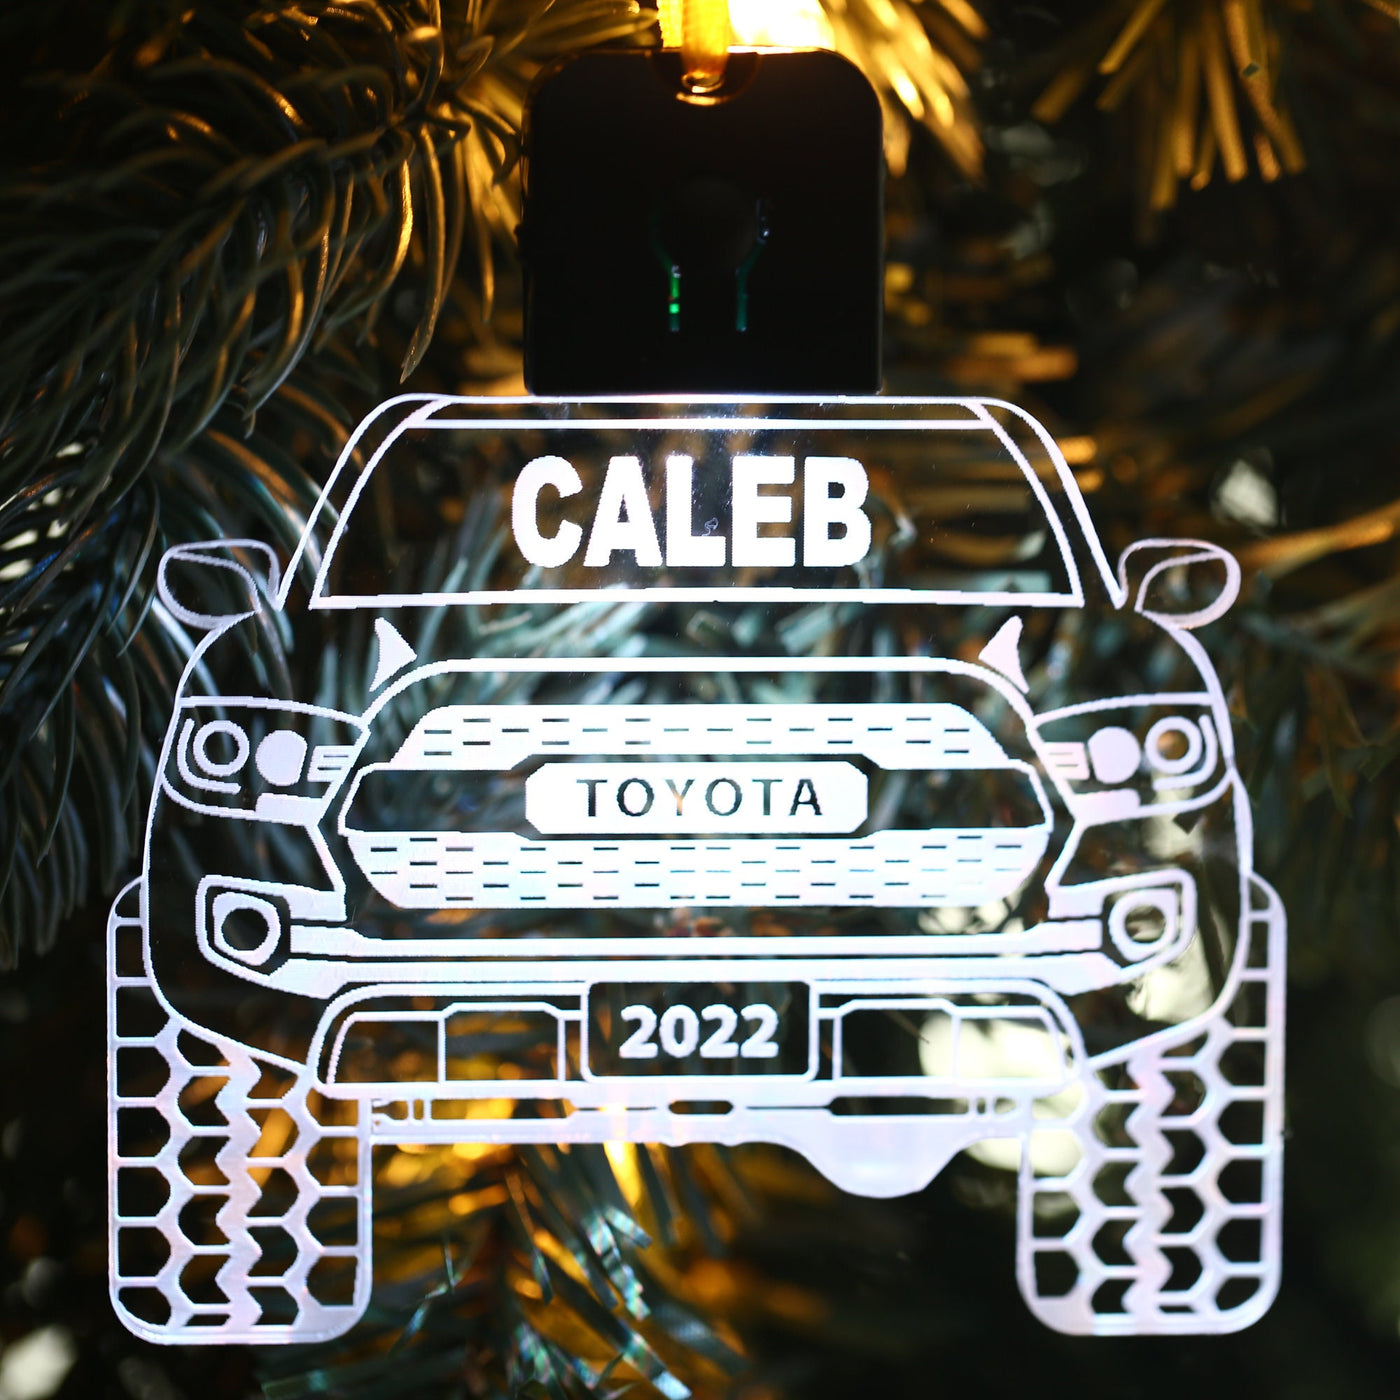 Personalized LED 4x4 Truck Ornament - Personalized LED Truck Ornament - Made in USA - Color Changing - Stocking Stuffer